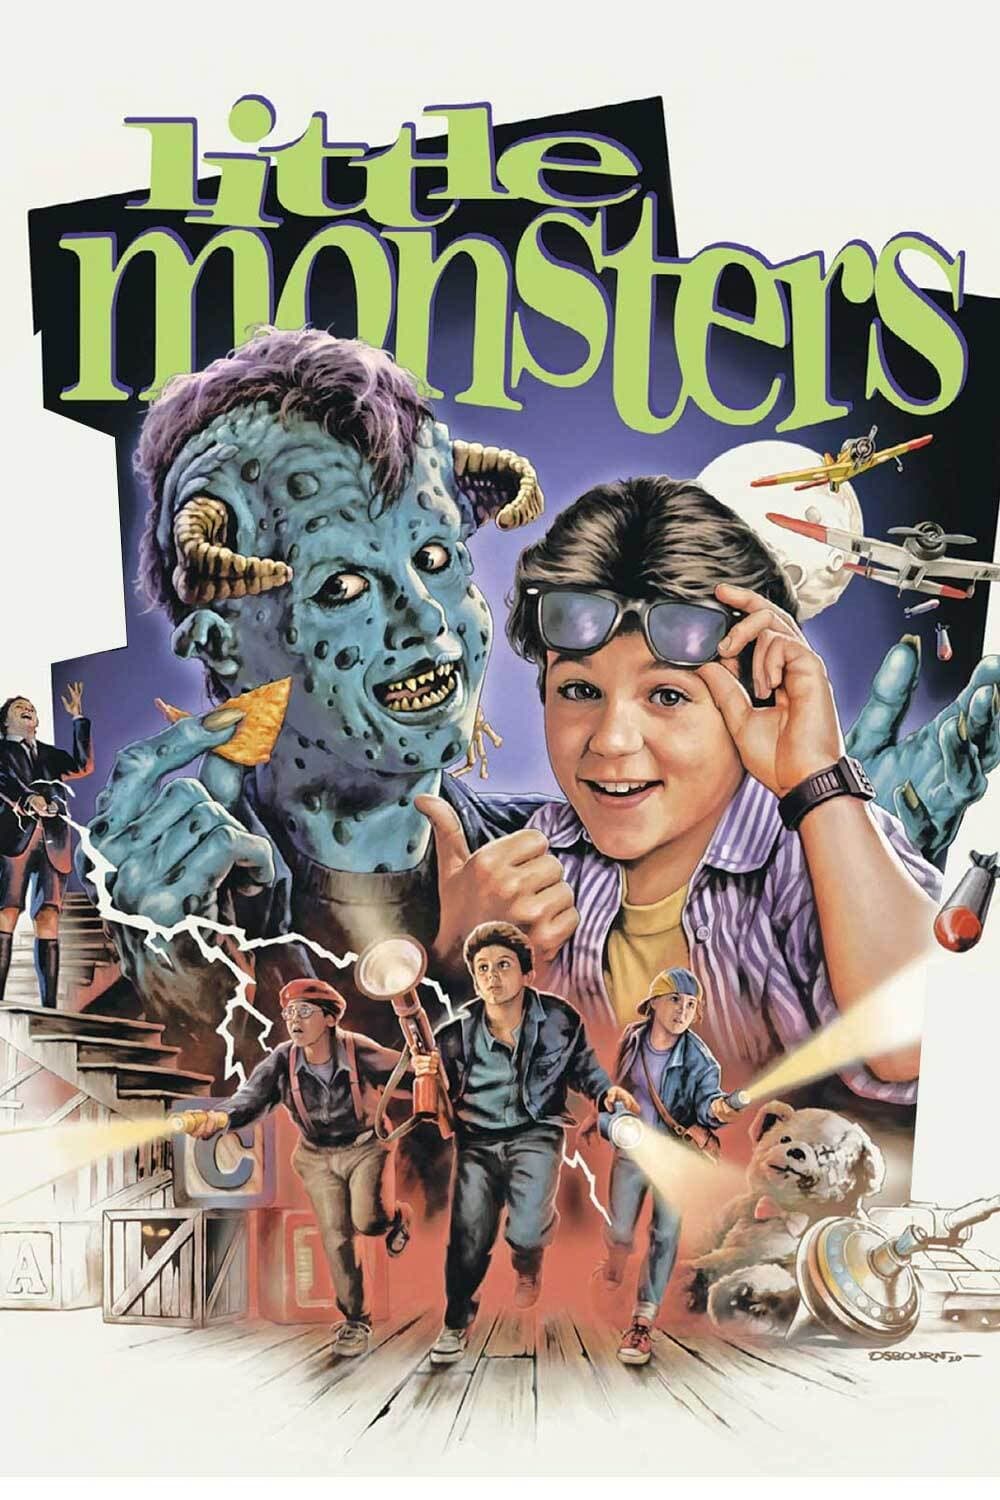 Chicos monsters (1989)